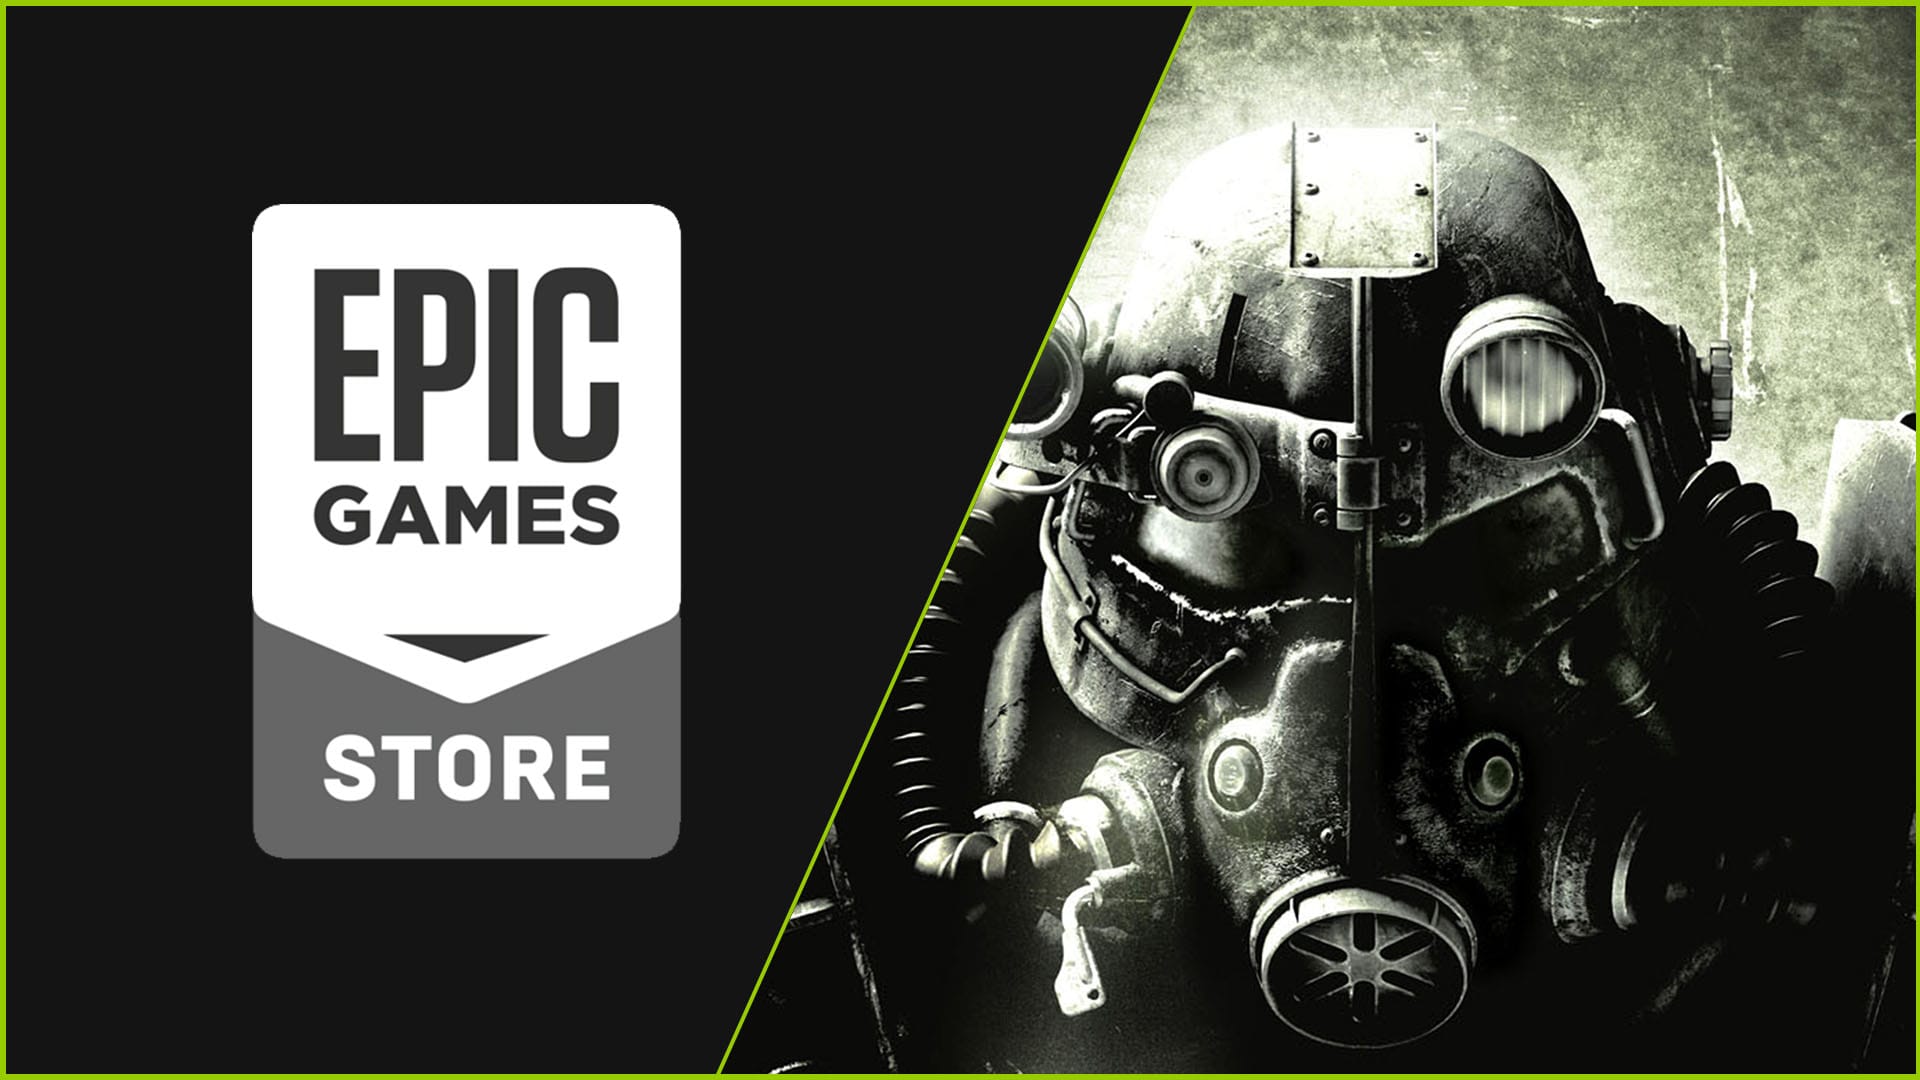 Fallout 3 is Free for a Day on The Epic Games Store